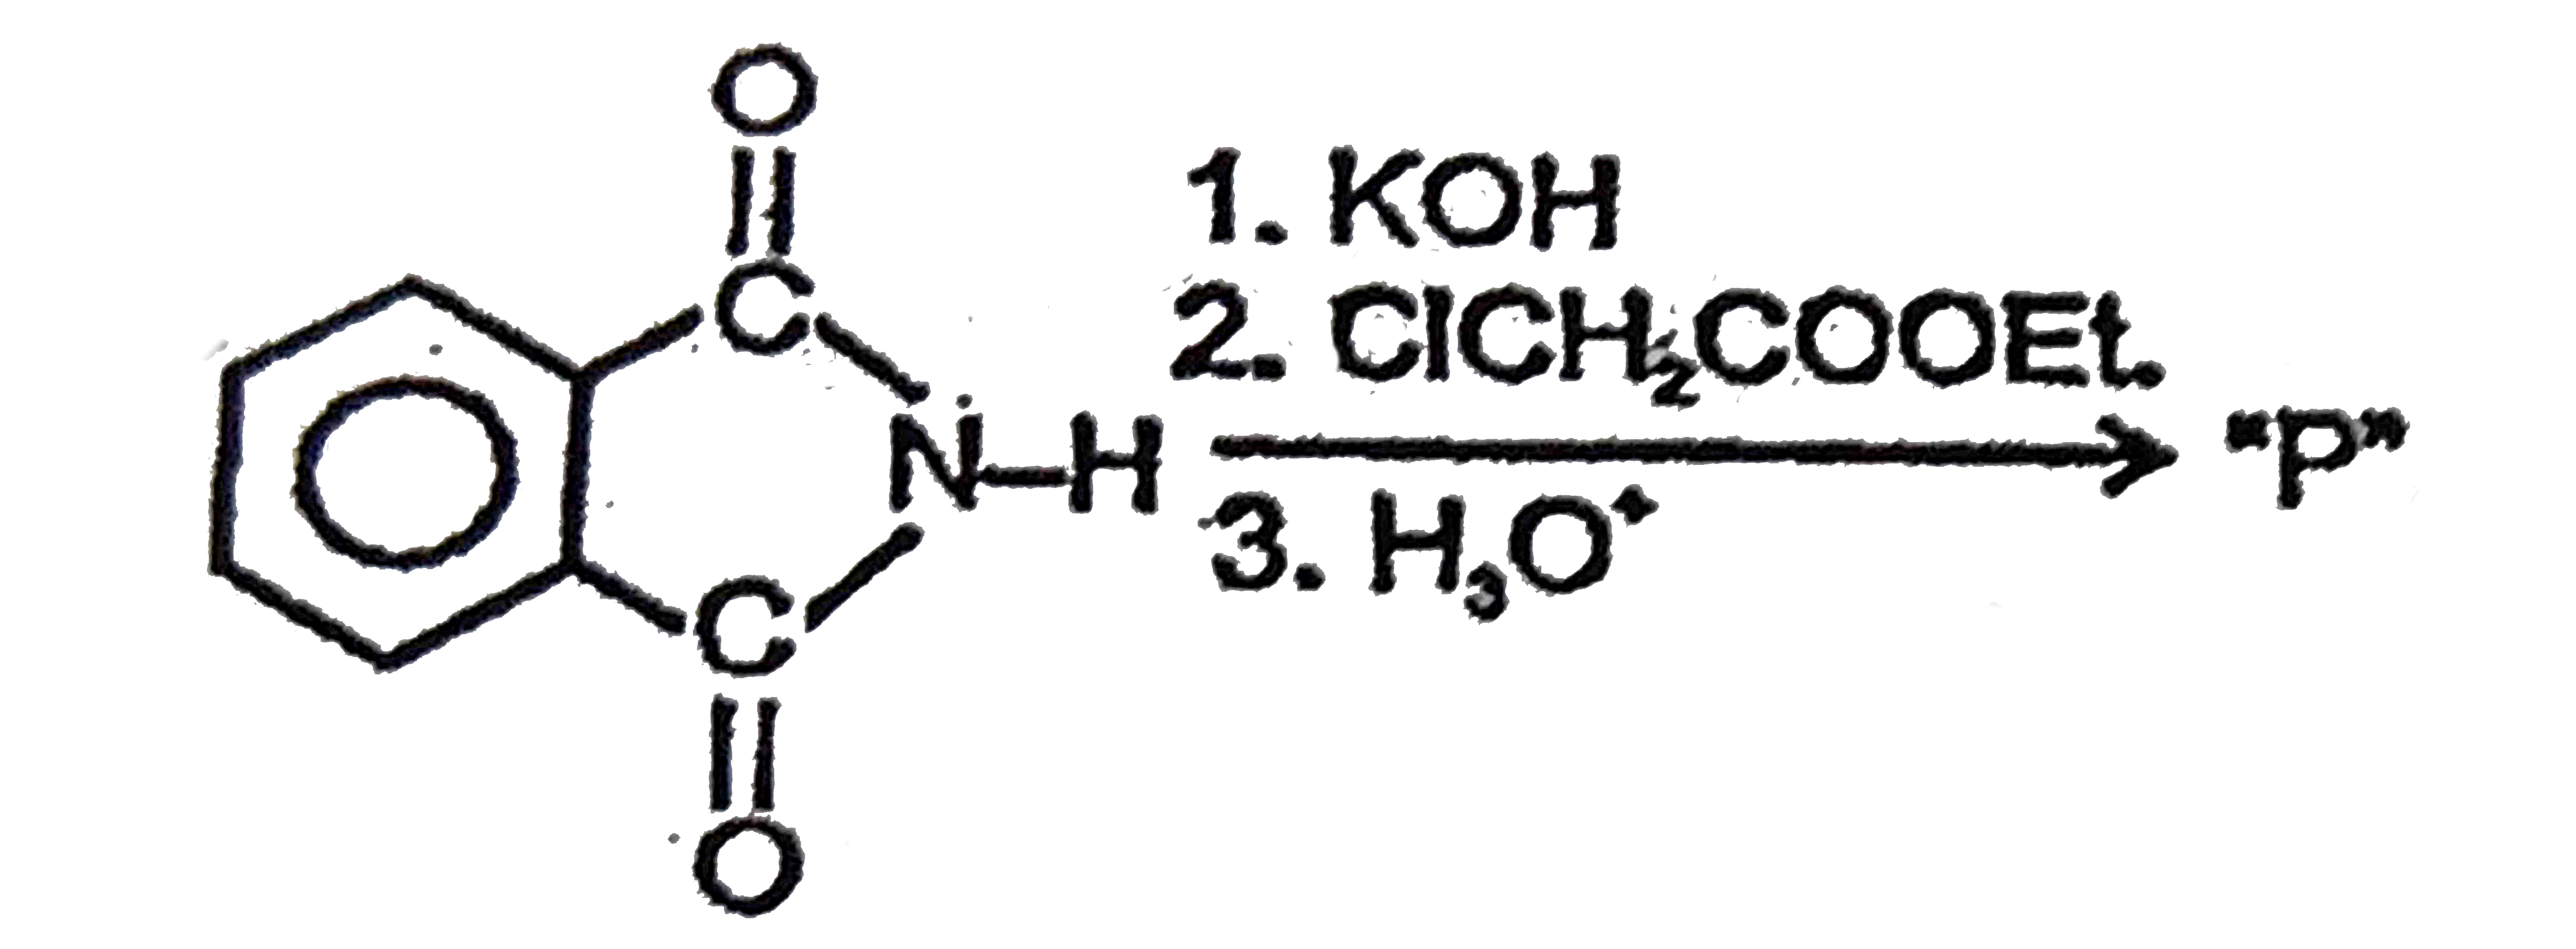 The product P formed in the given reaction sequence is .